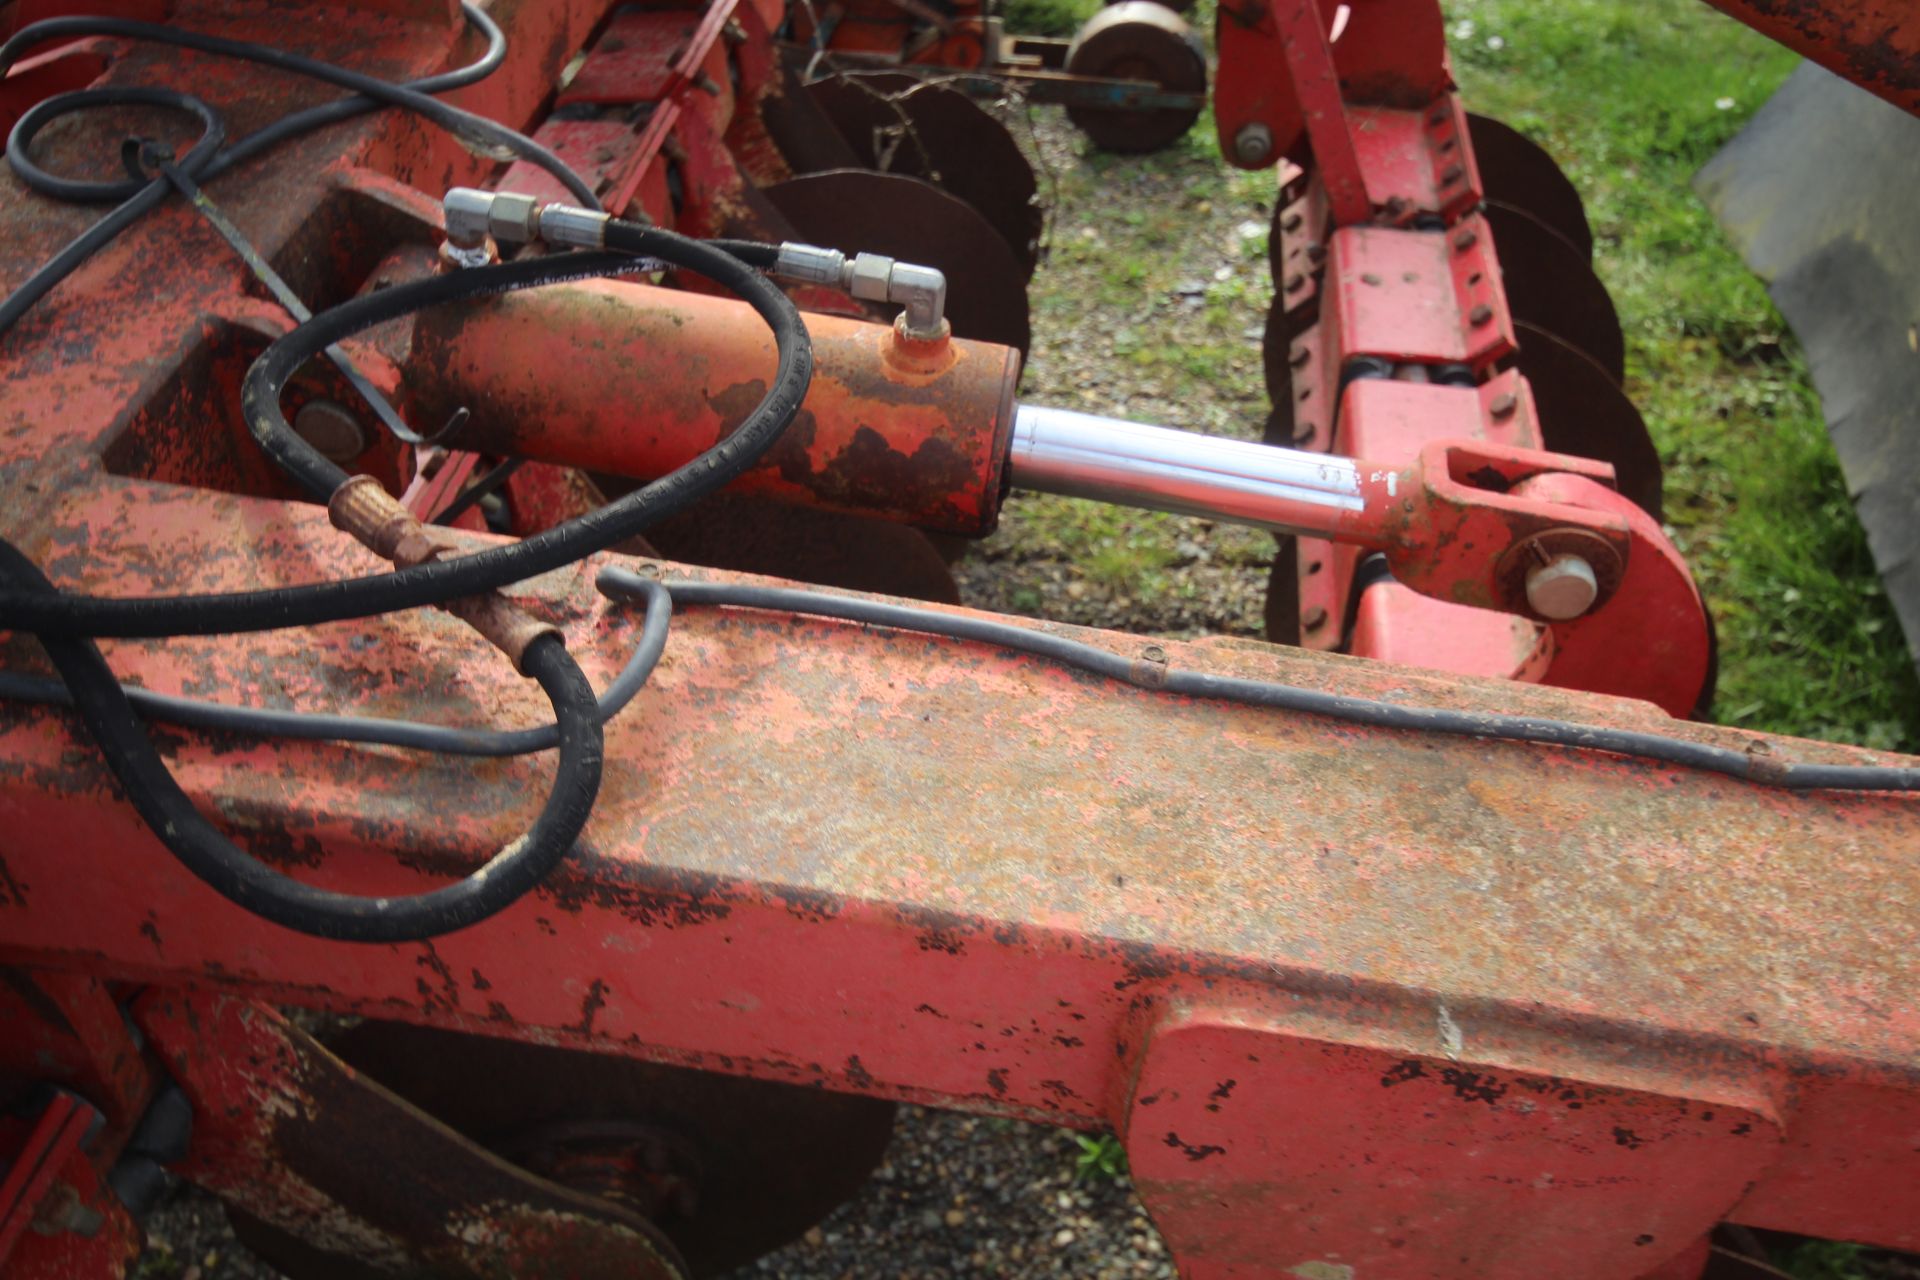 HeVa 3.5m Combi-Lift 7 lege subsoiler. Coupled to HeVa Disc Roller. Comprising two rows of discs and - Bild 11 aus 31